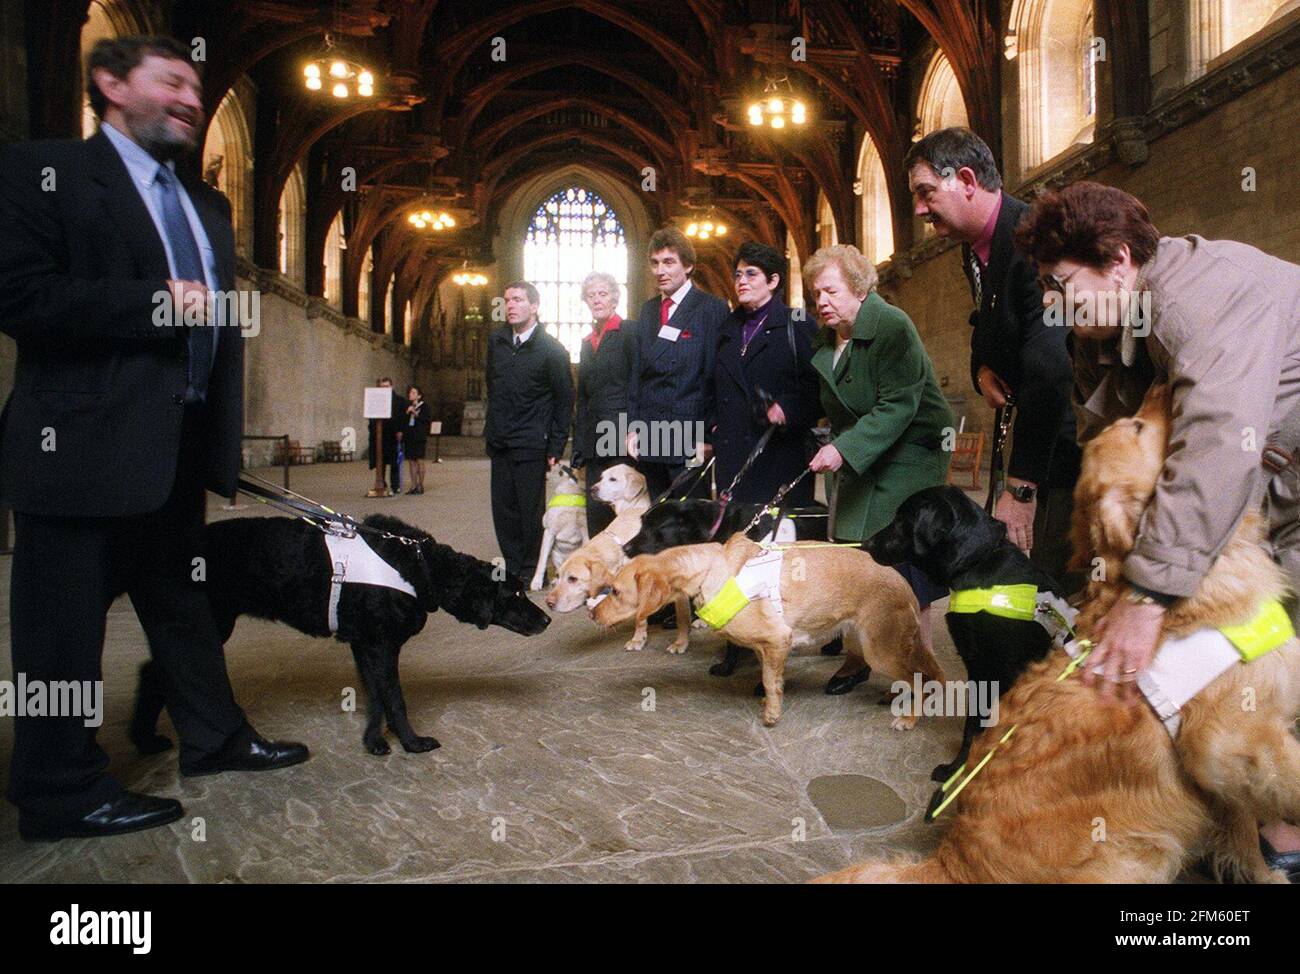 David Blunkett Guide Dogs For the Blind Association March 2001The guide dogs for the blind assocition held a reception at the House of Commons  to celebrate the introduction of section 37 of the disability discrimination act 1995 which requires licensed taxi drivers to carry guide dogs in their car  David Blunkett MP and Education secretary with his guide dog Lucy seen here meeting some of the association members and their dogs in the House of Commons Stock Photo